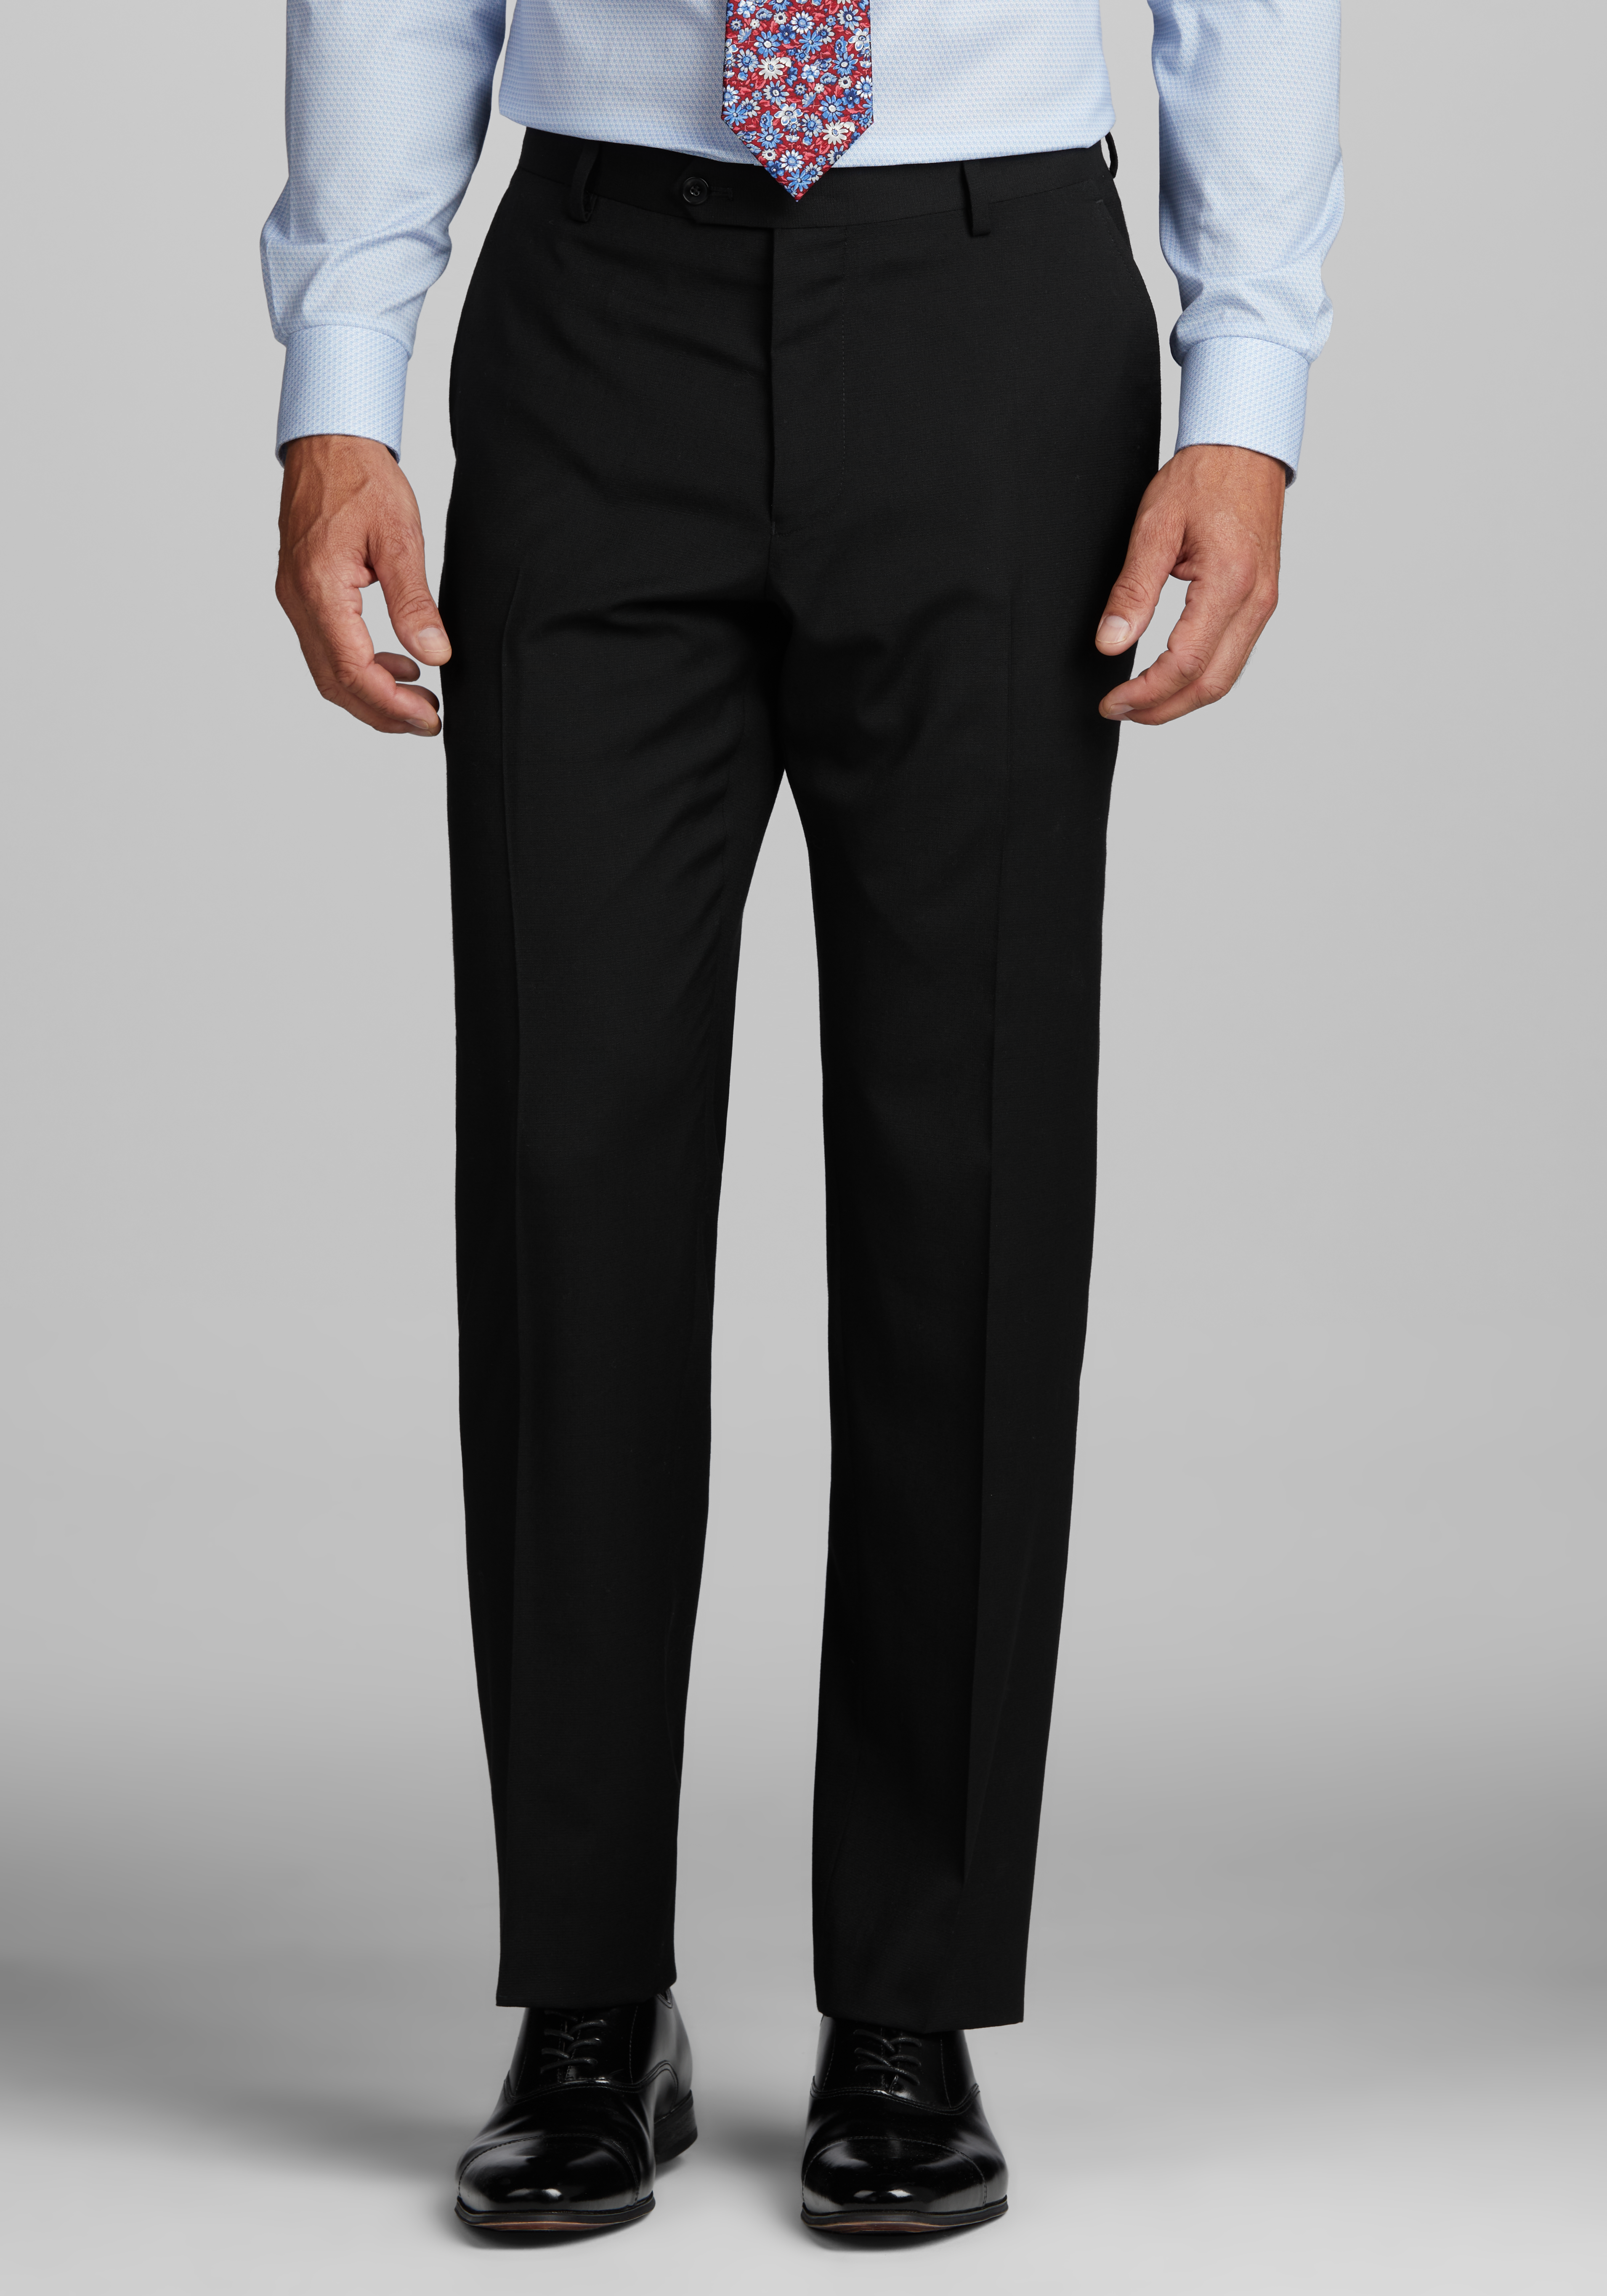 NWT 44R BLACK WITH GOLD PINSTRIPE SUIT ,SLIM FIT, FLAT FRONT PANTS, BOW TIE